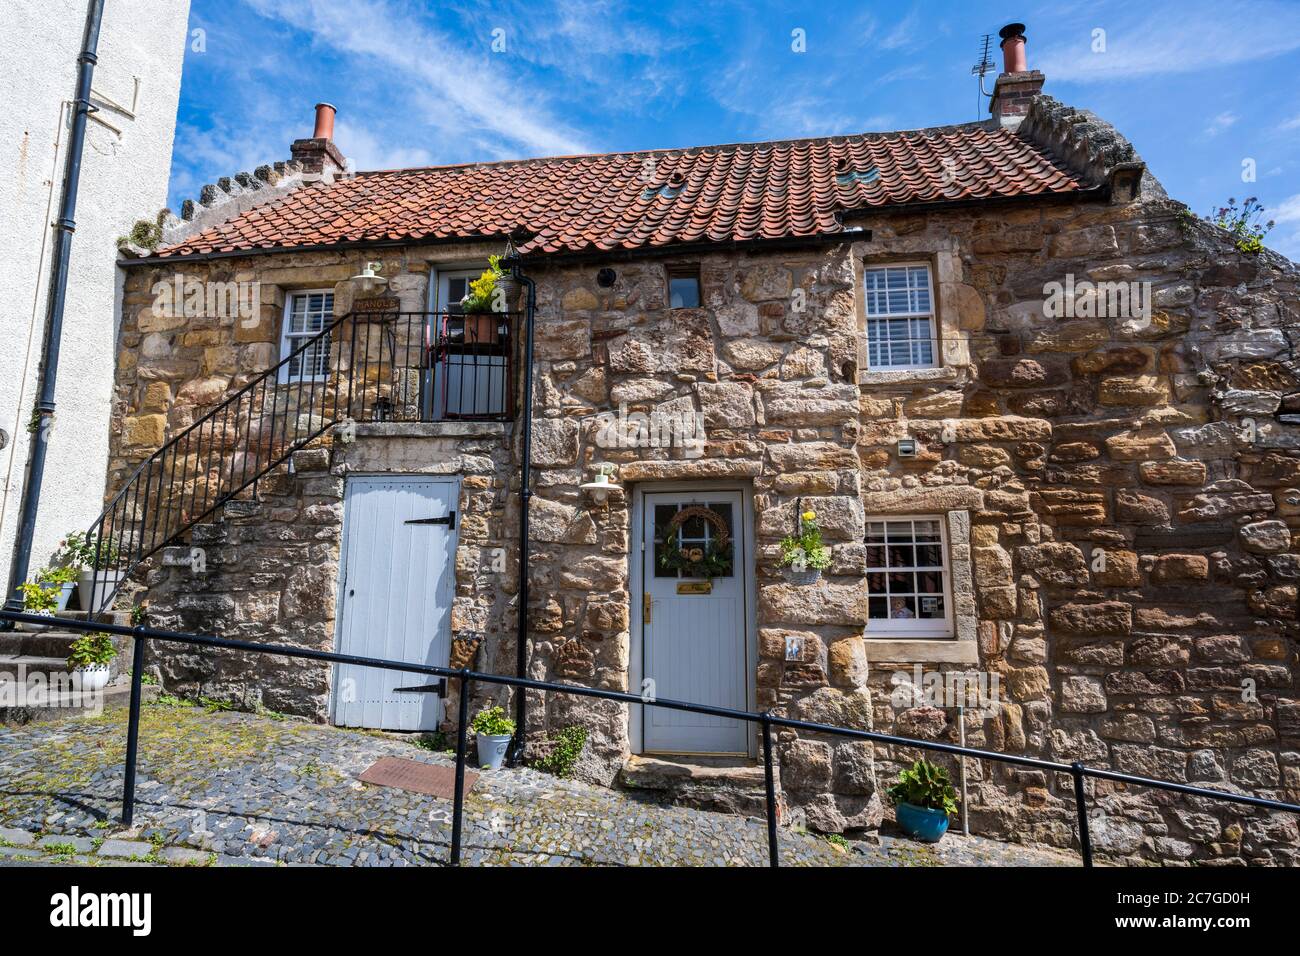 Mangle Cottage on Water Wynd in picturesque Scottish coastal town of Pittenweem in East Neuk of Fife, Scotland, UK Stock Photo